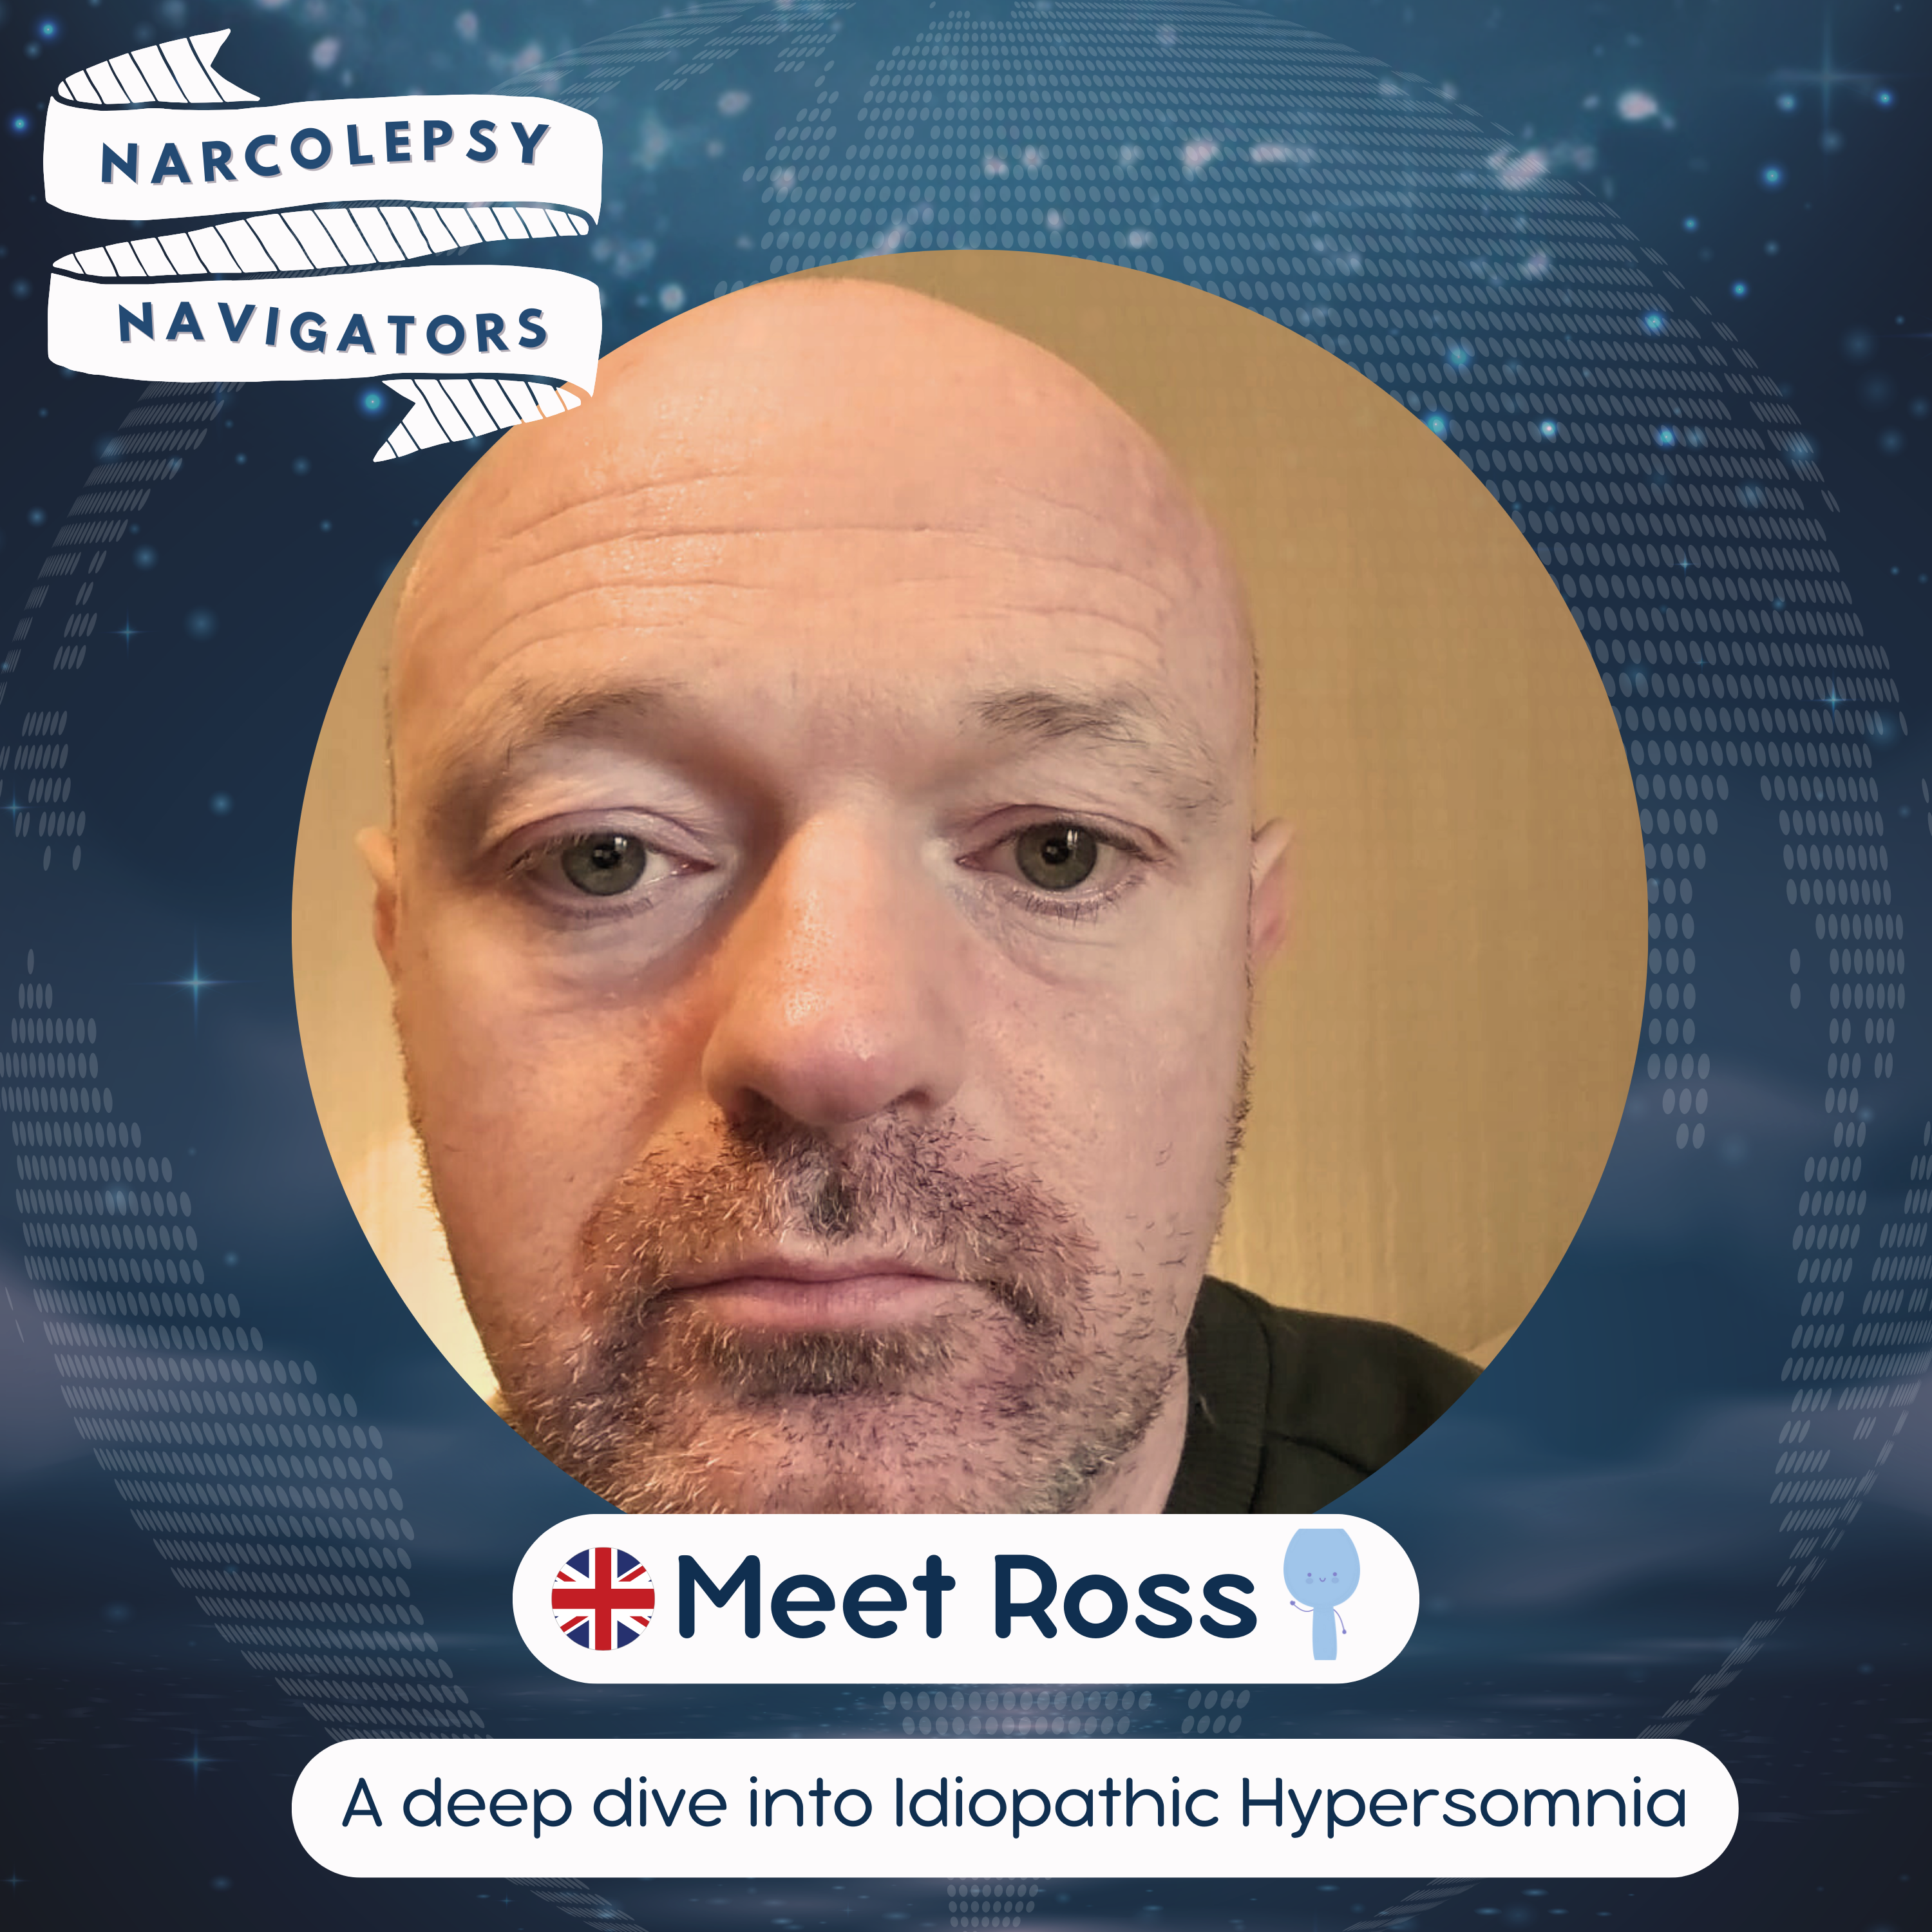 A Deep Dive Into Idiopathic Hypersomnia with Ross